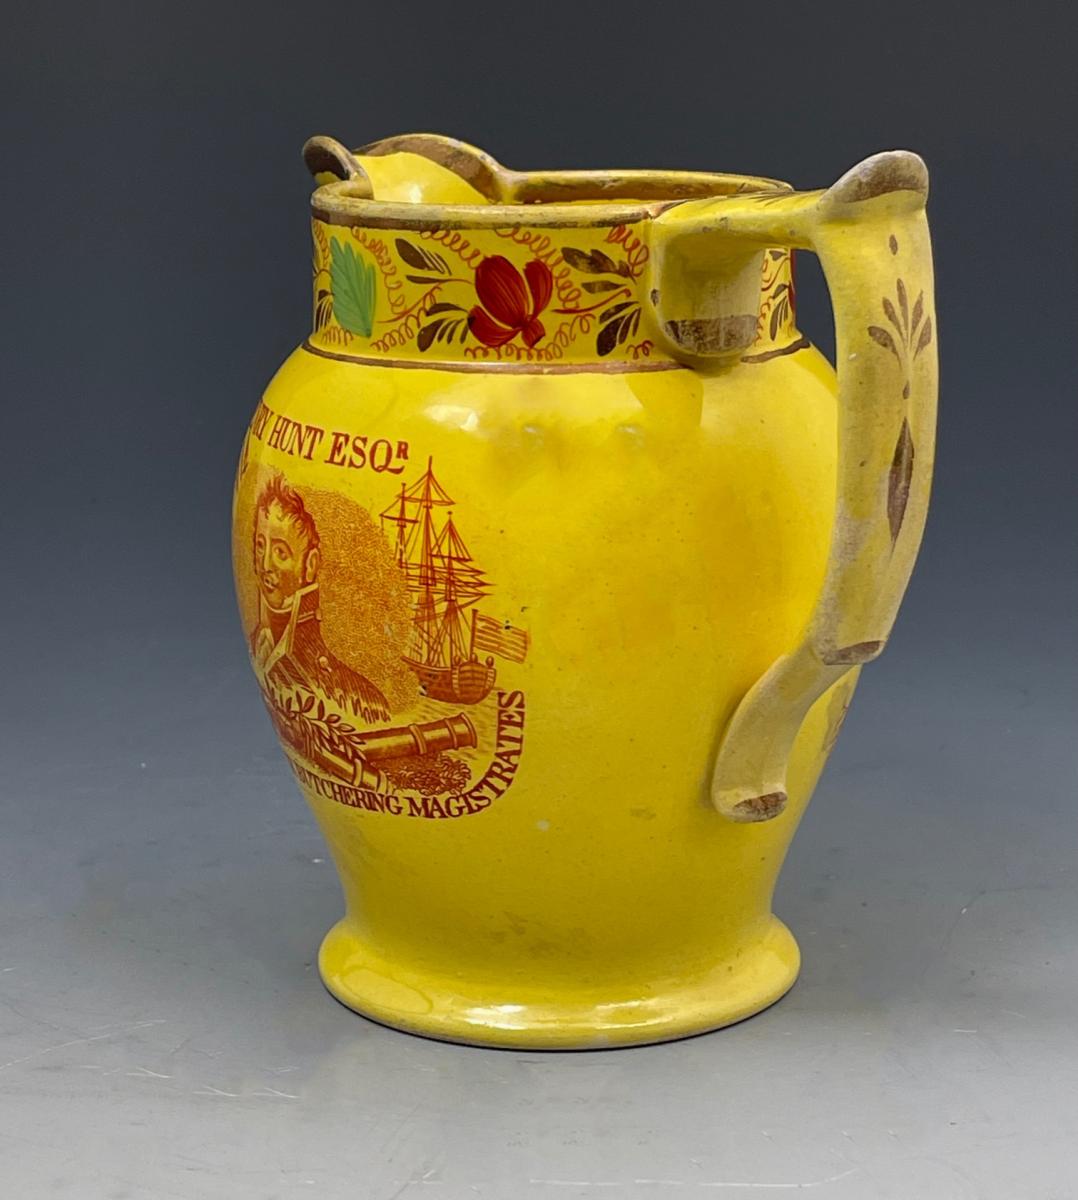 Yellow ground pottery commemorative jug related to the Peterloo Massacre in 1819